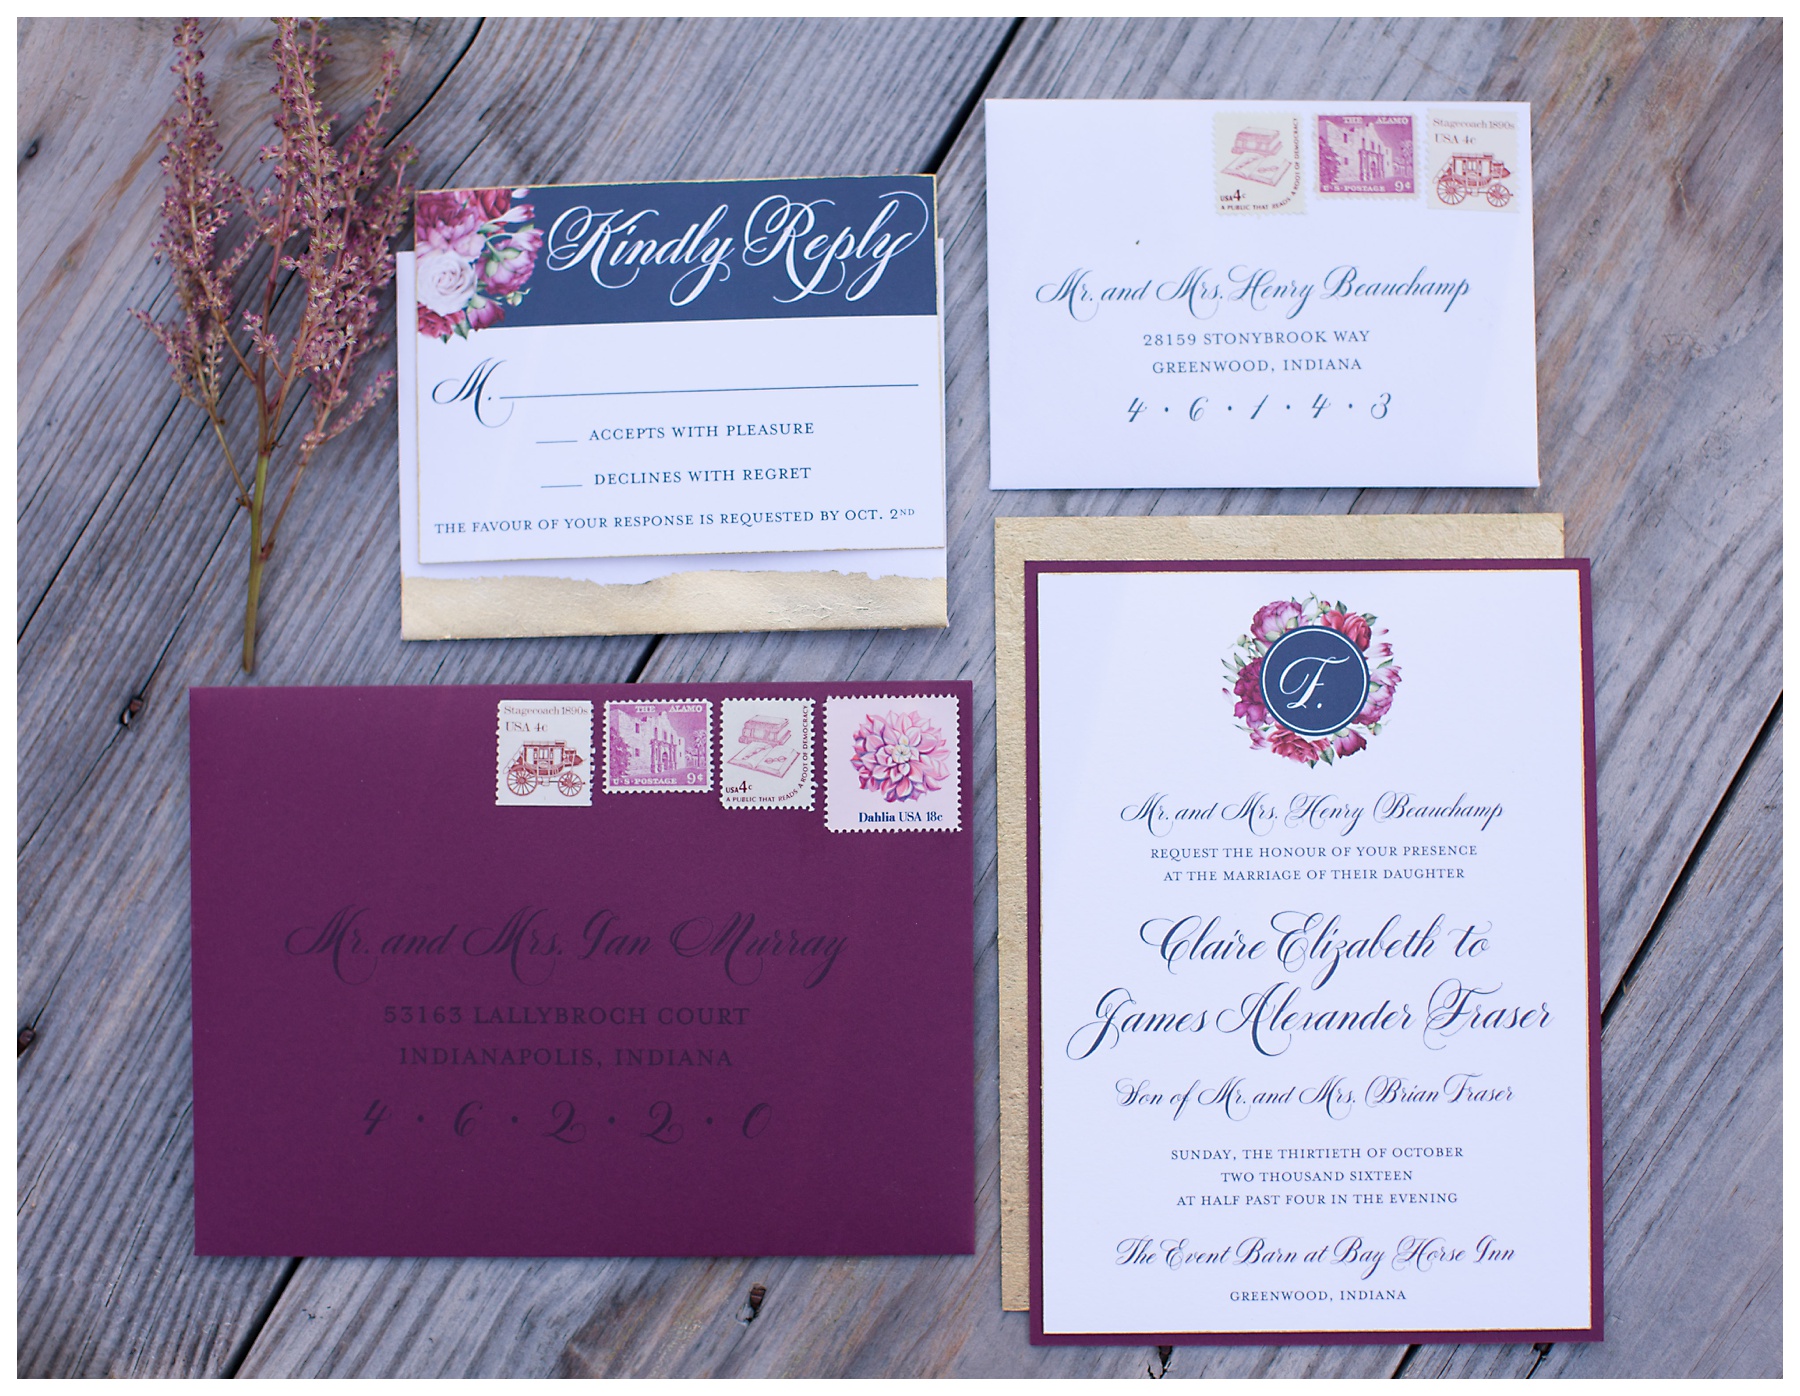 Love everything about this invitation! Brides...always remember to bring an invite with you on your wedding day so your photographer can capture the details!